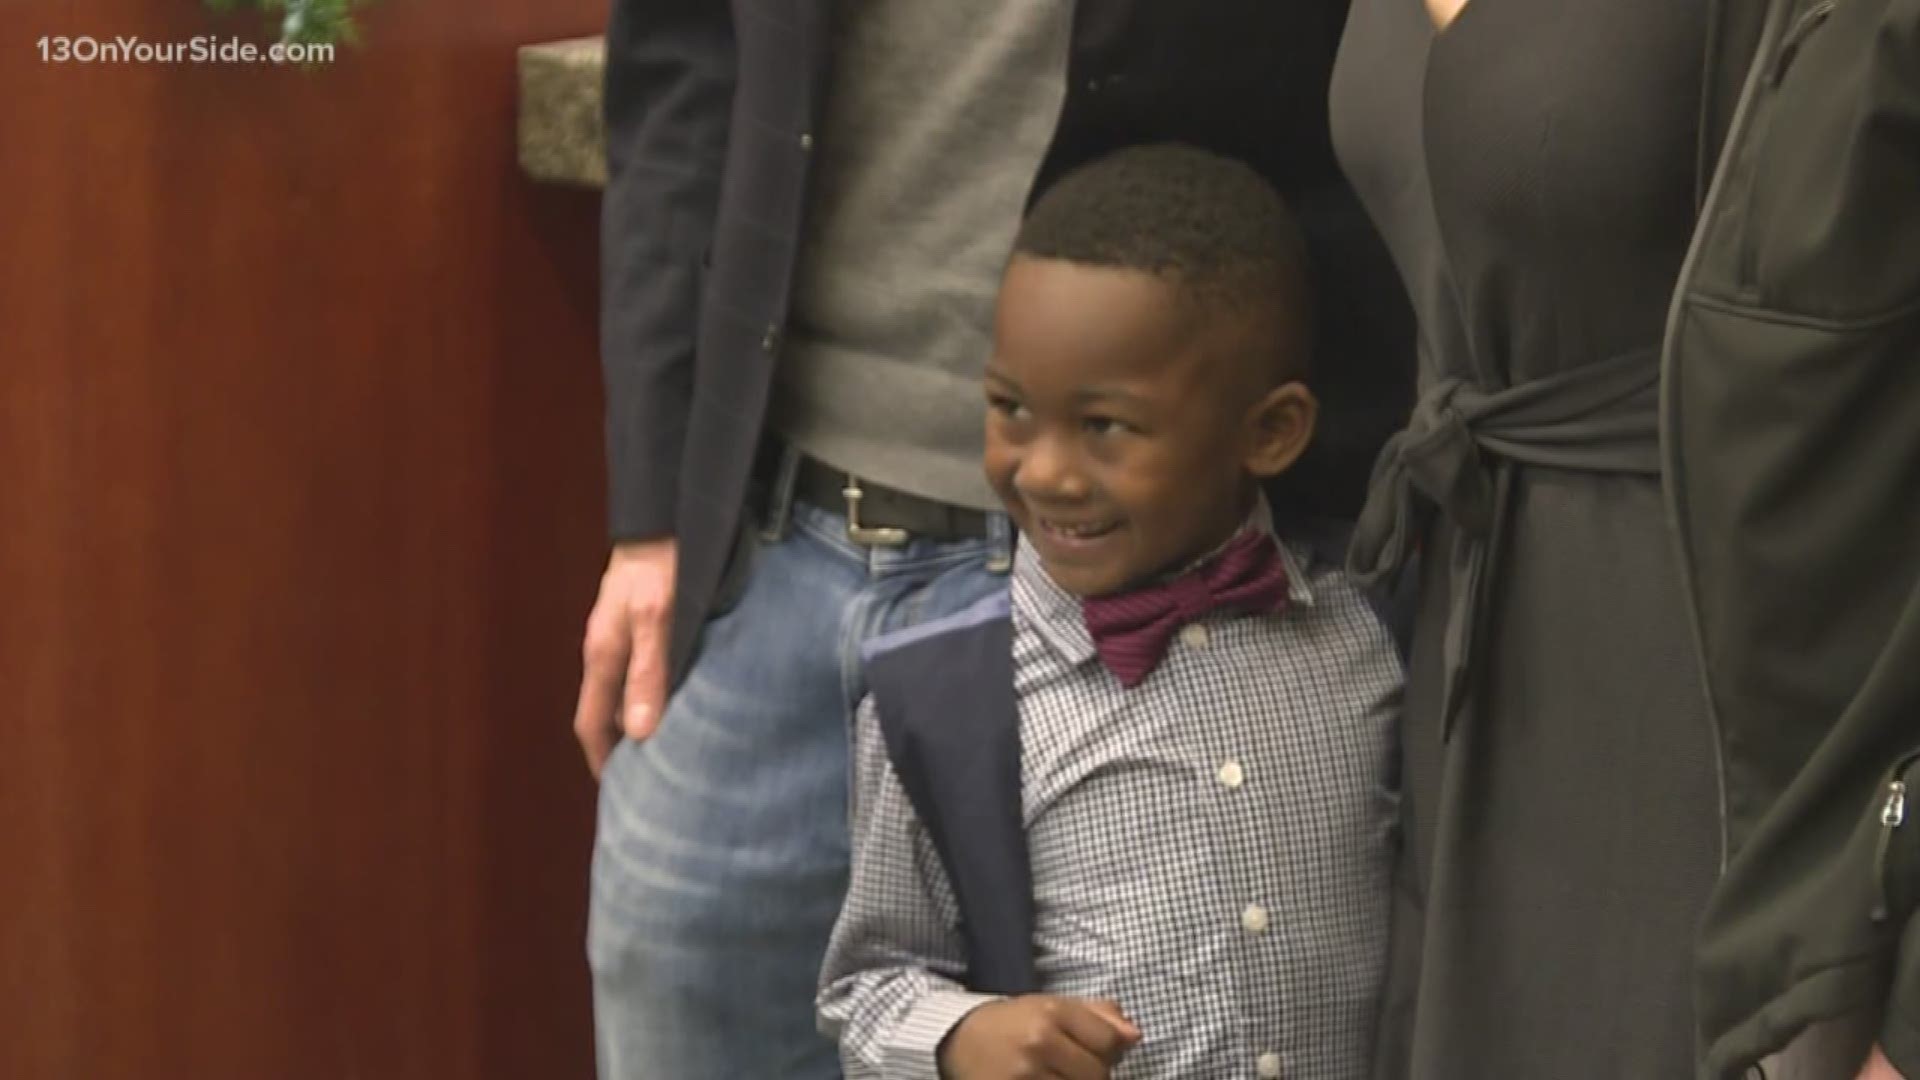 One child invited his entire kindergarten class to attend his adoption hearing.